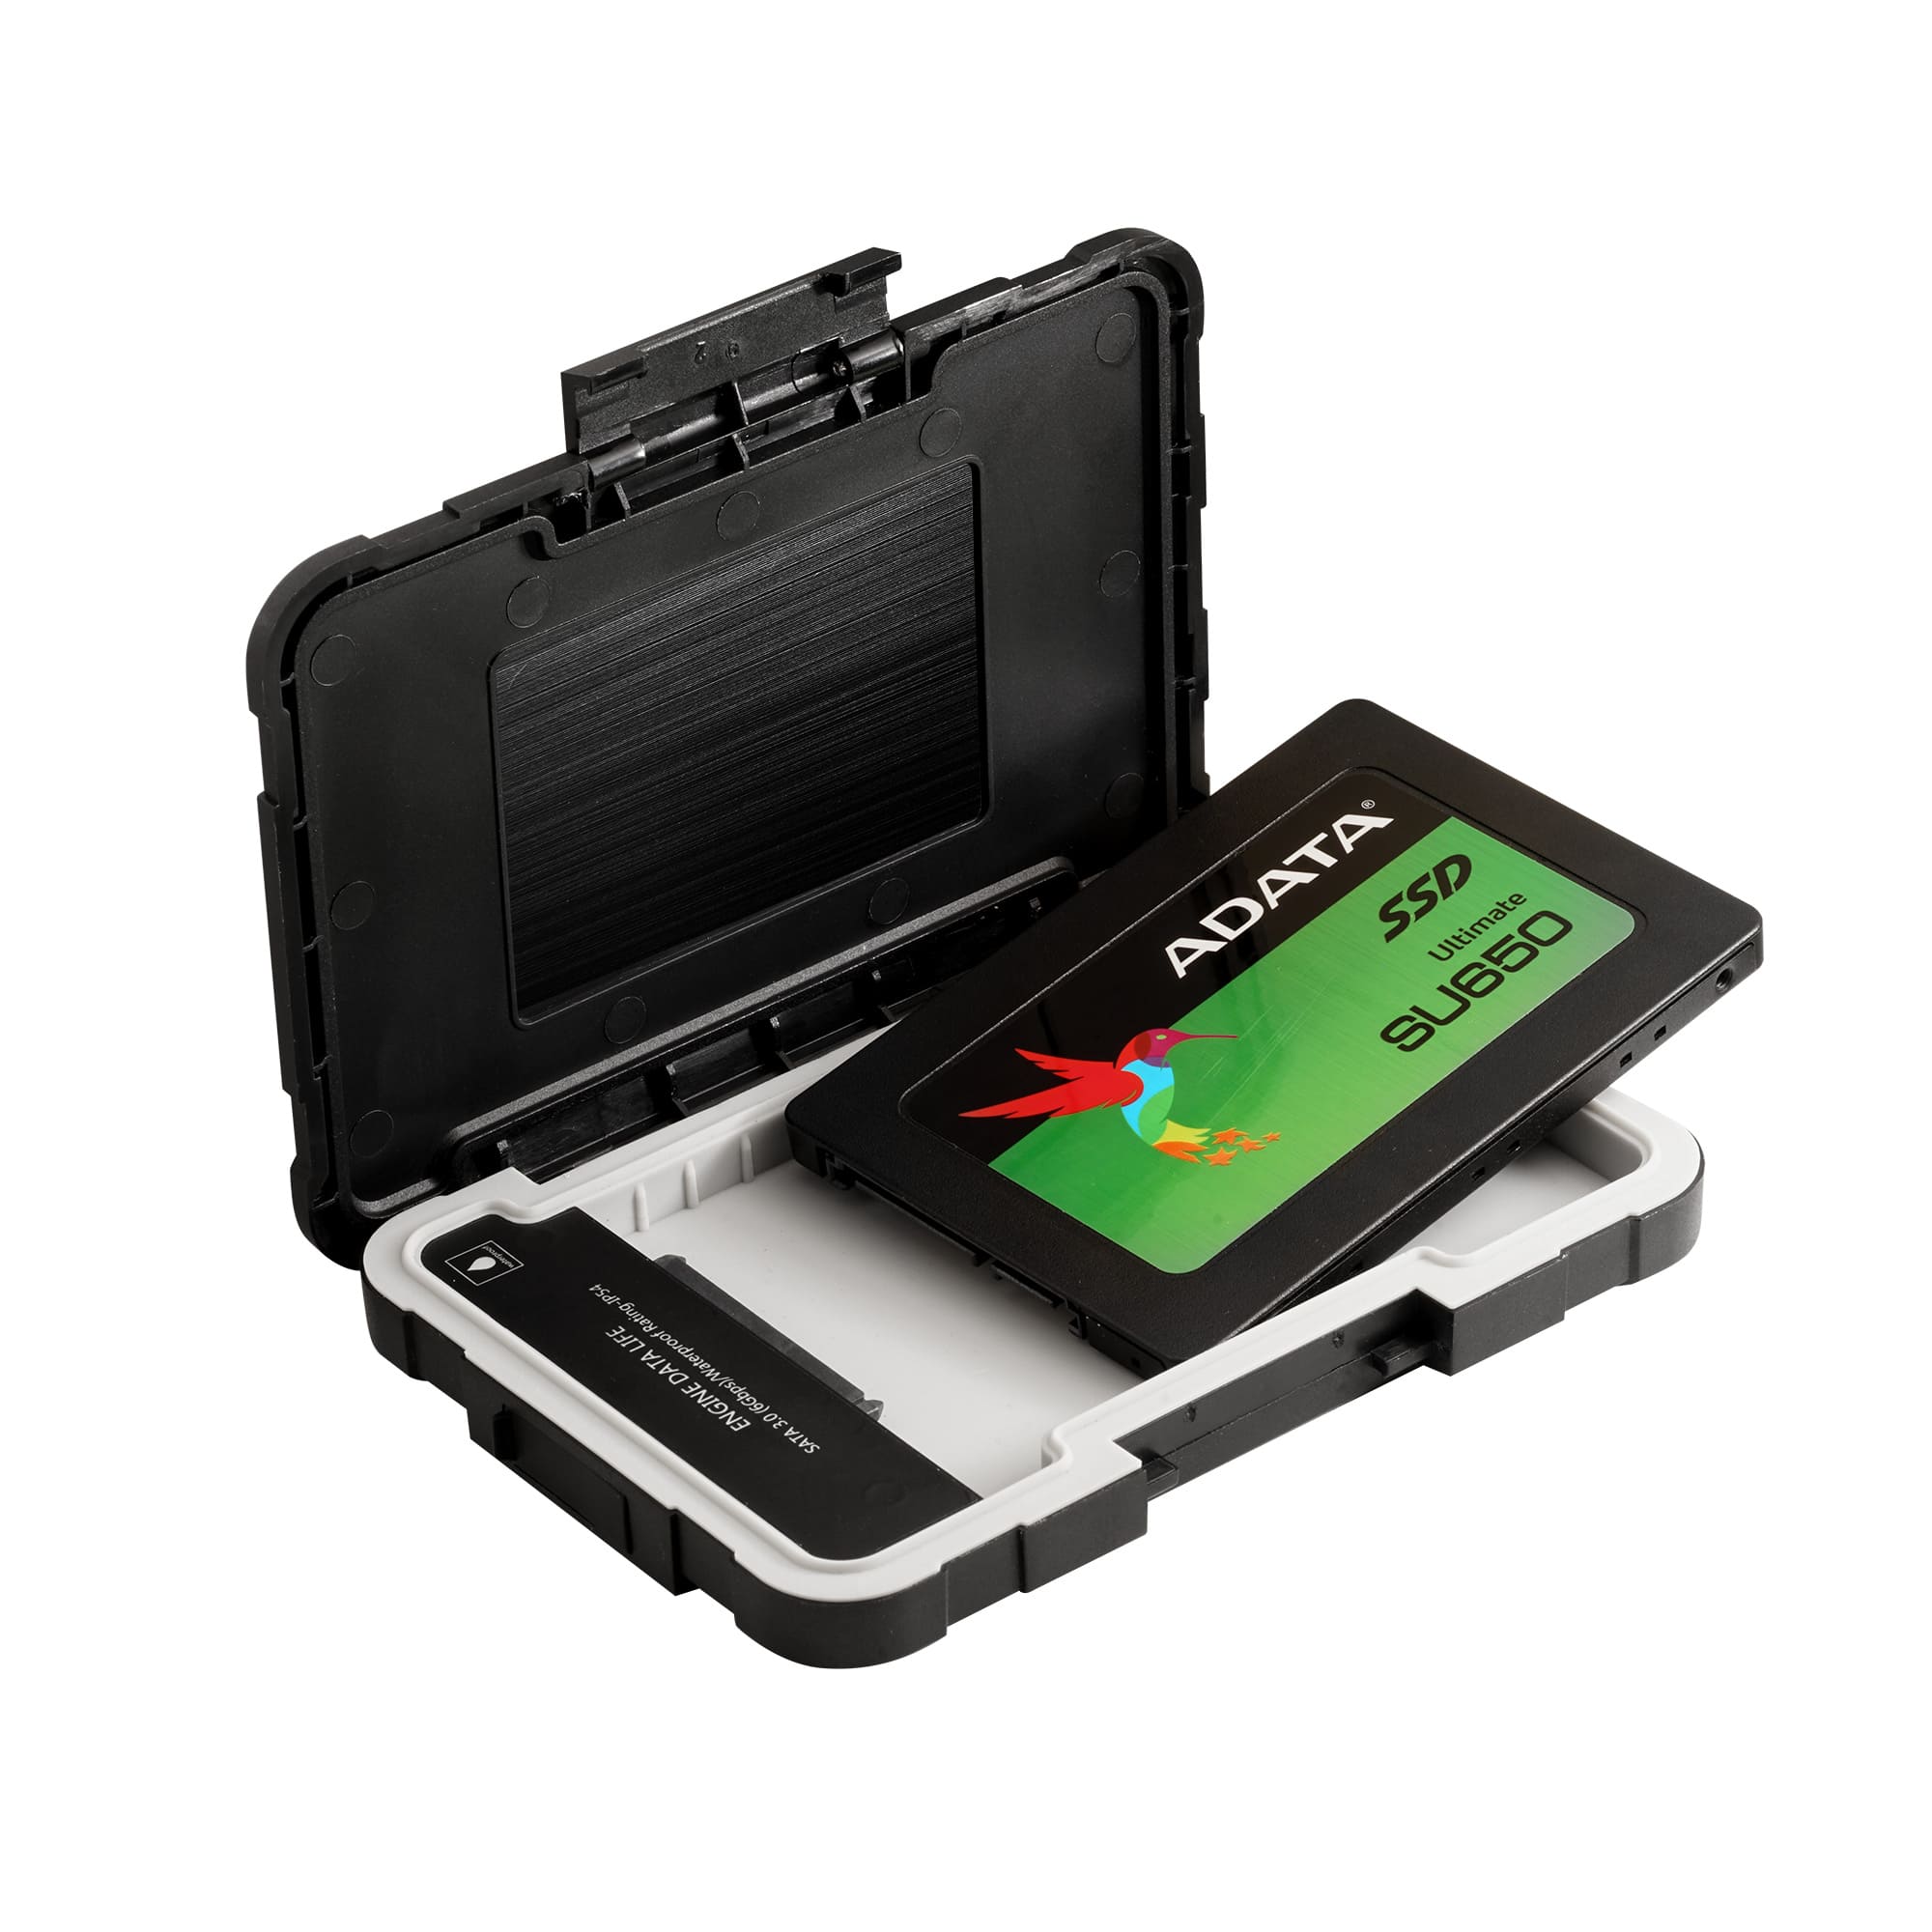 Carry Disk Externo Adata Durable ED600 Black